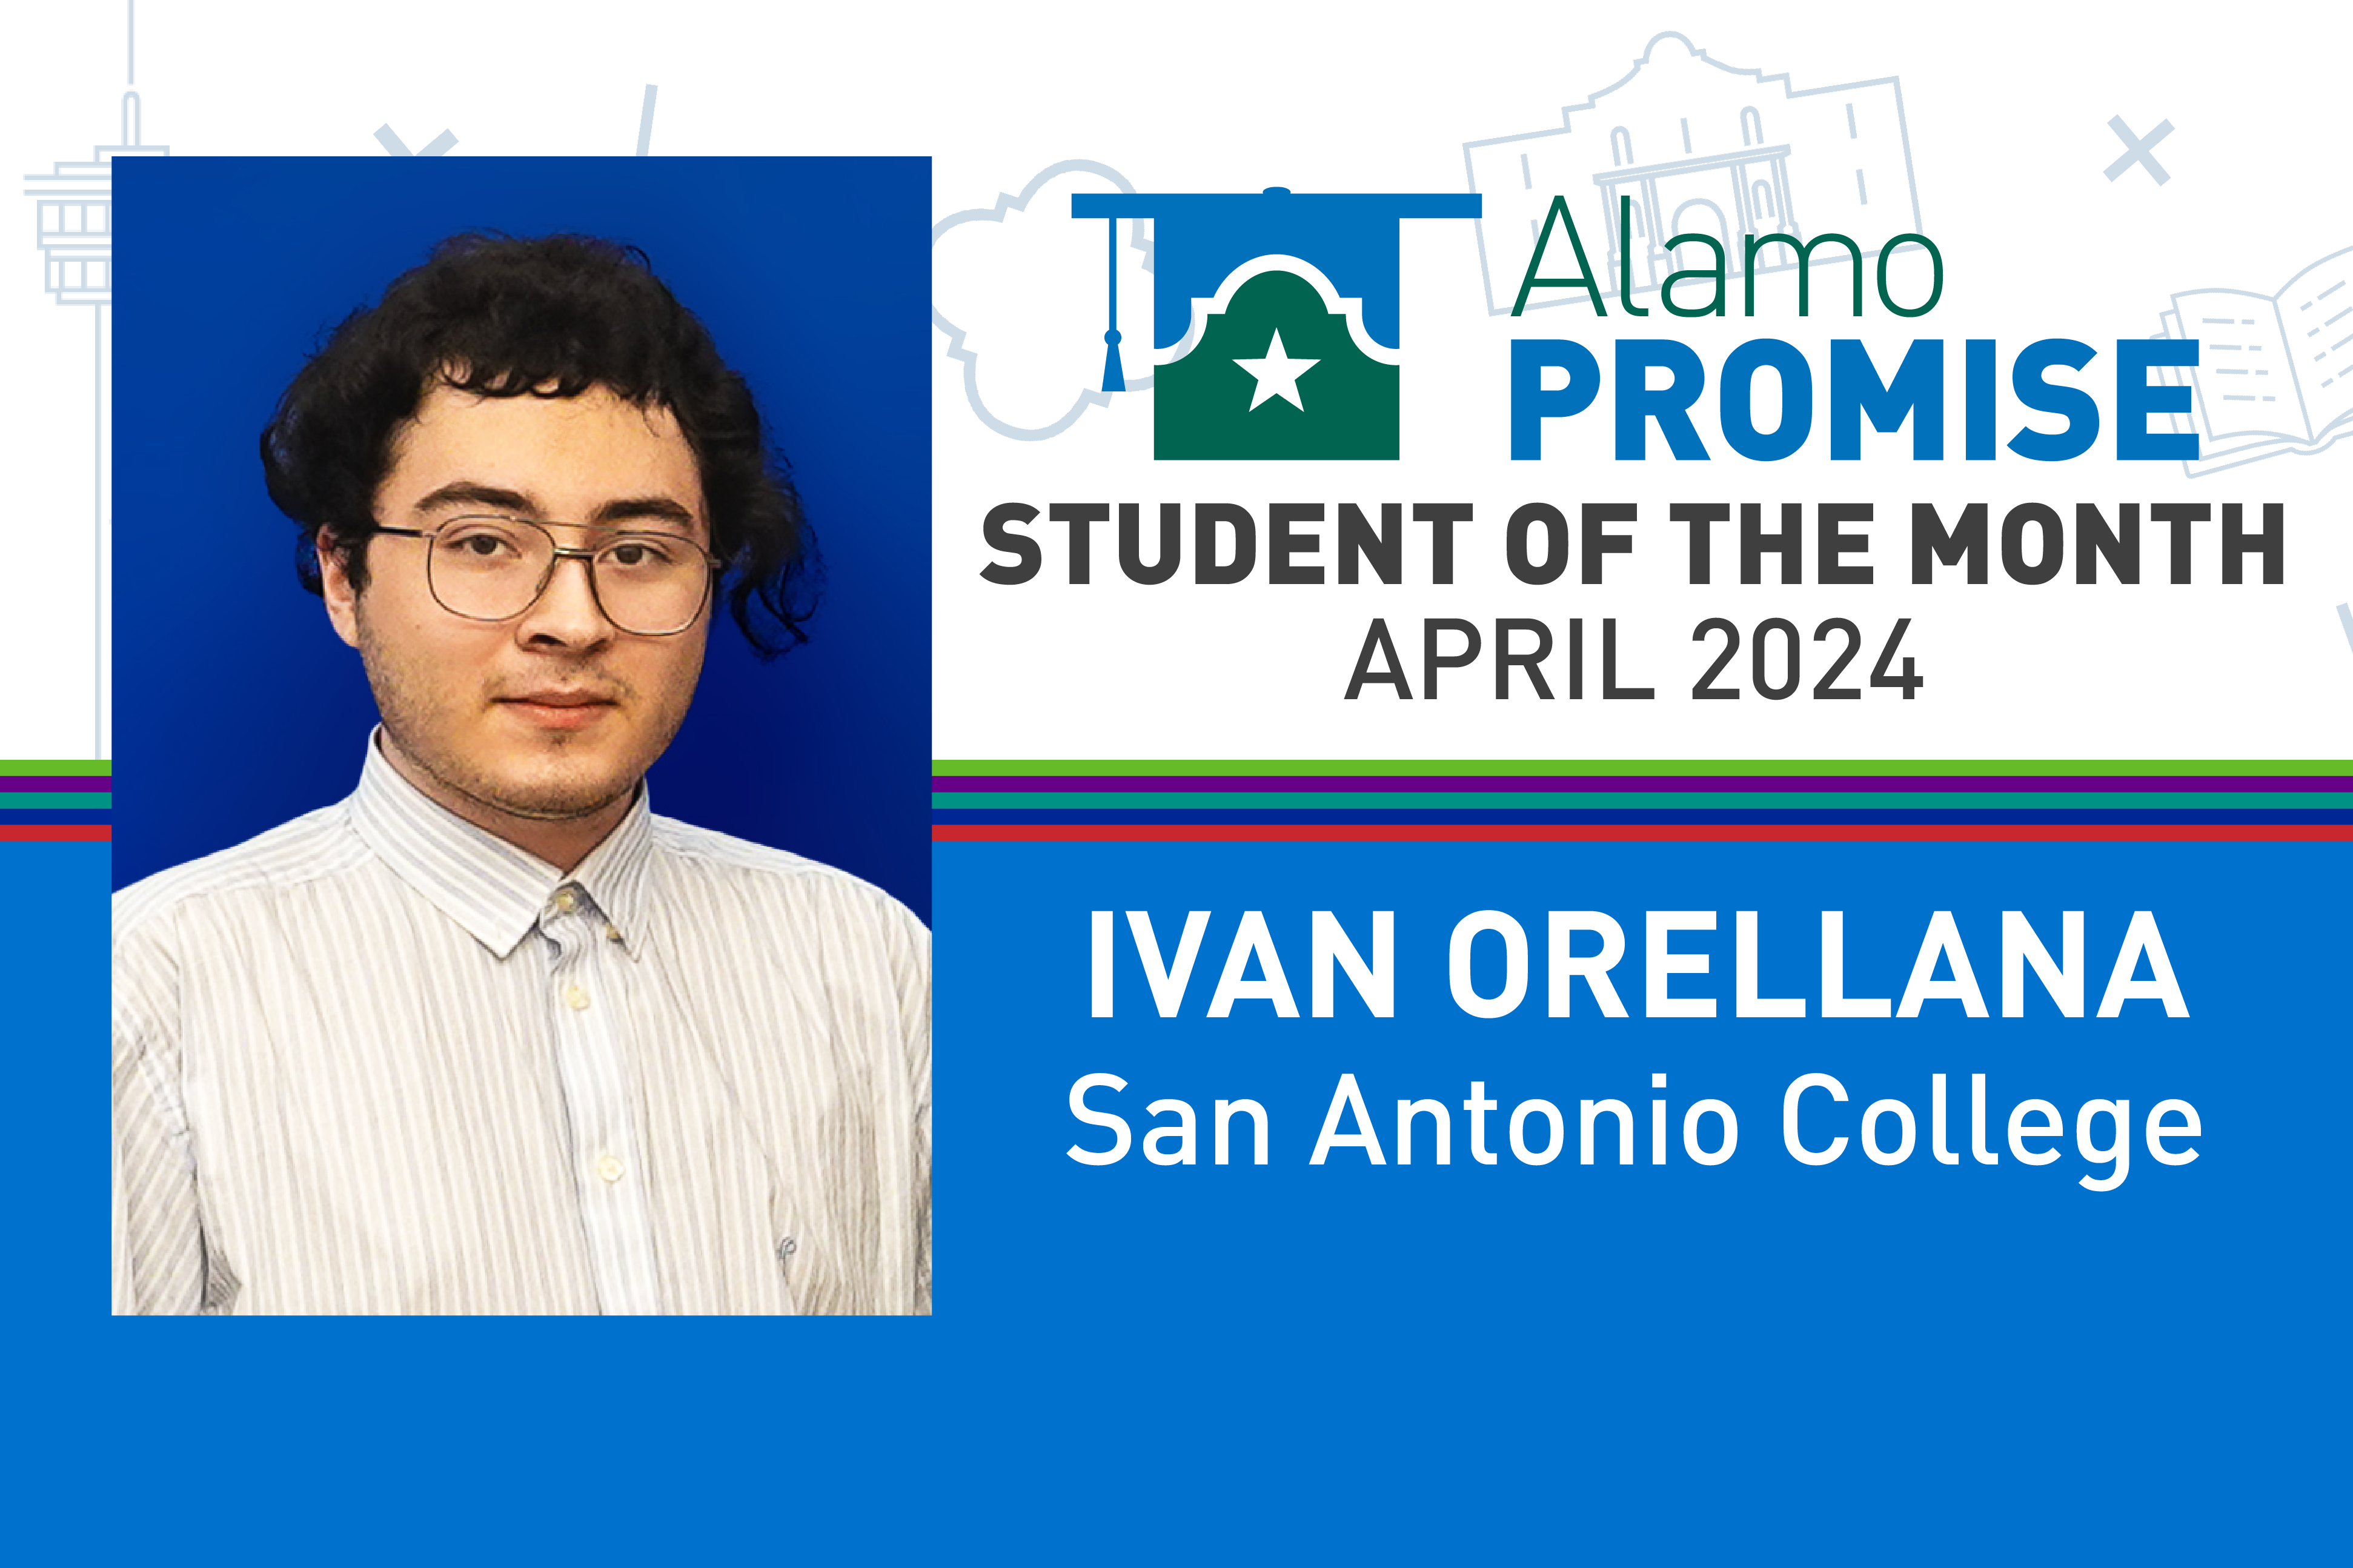 AlamoPROMISE Student of the Month - April-932x621.png